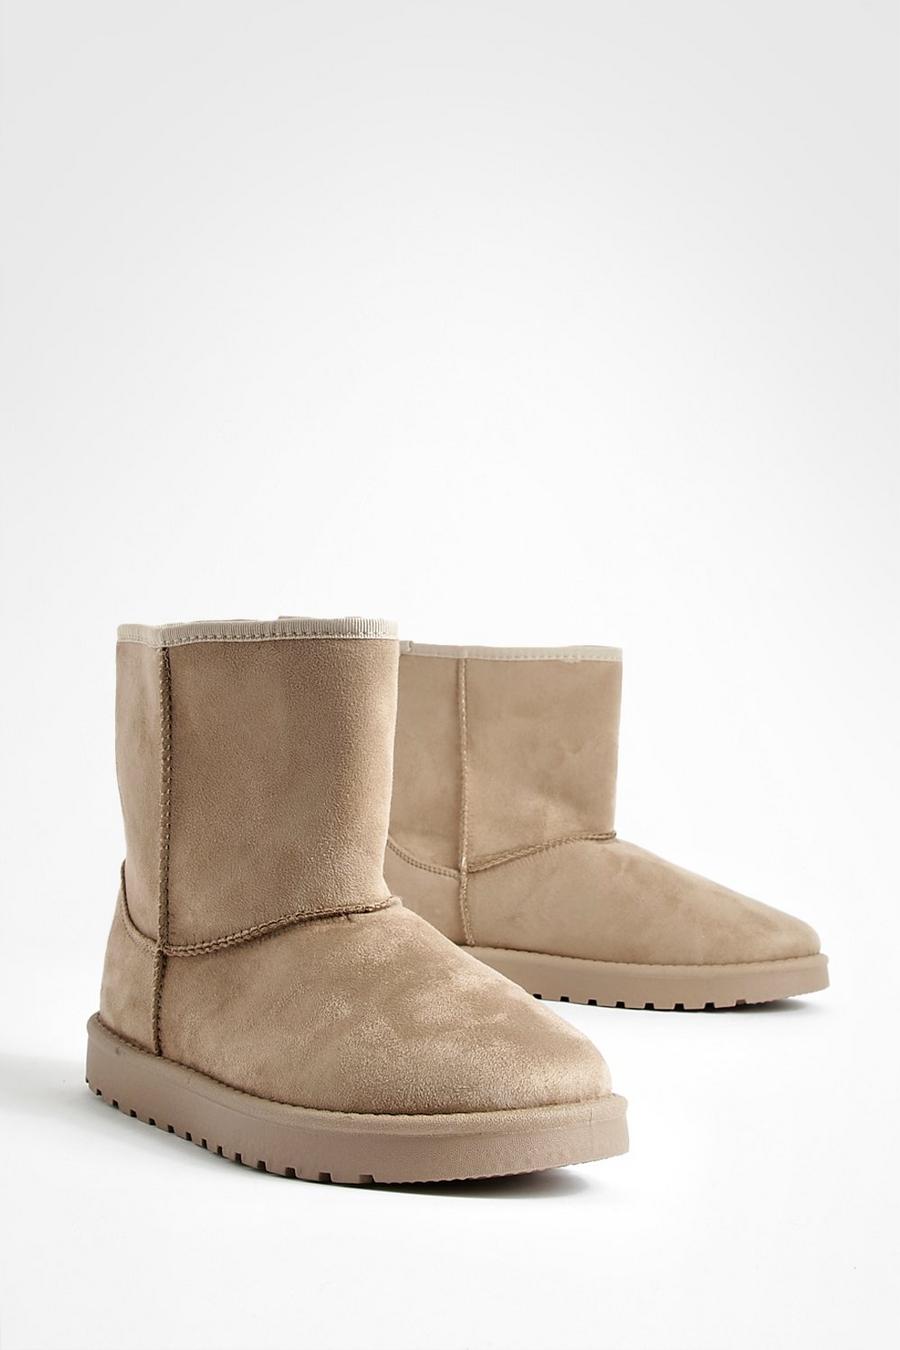 Khaki Ankle Cosy Boots   